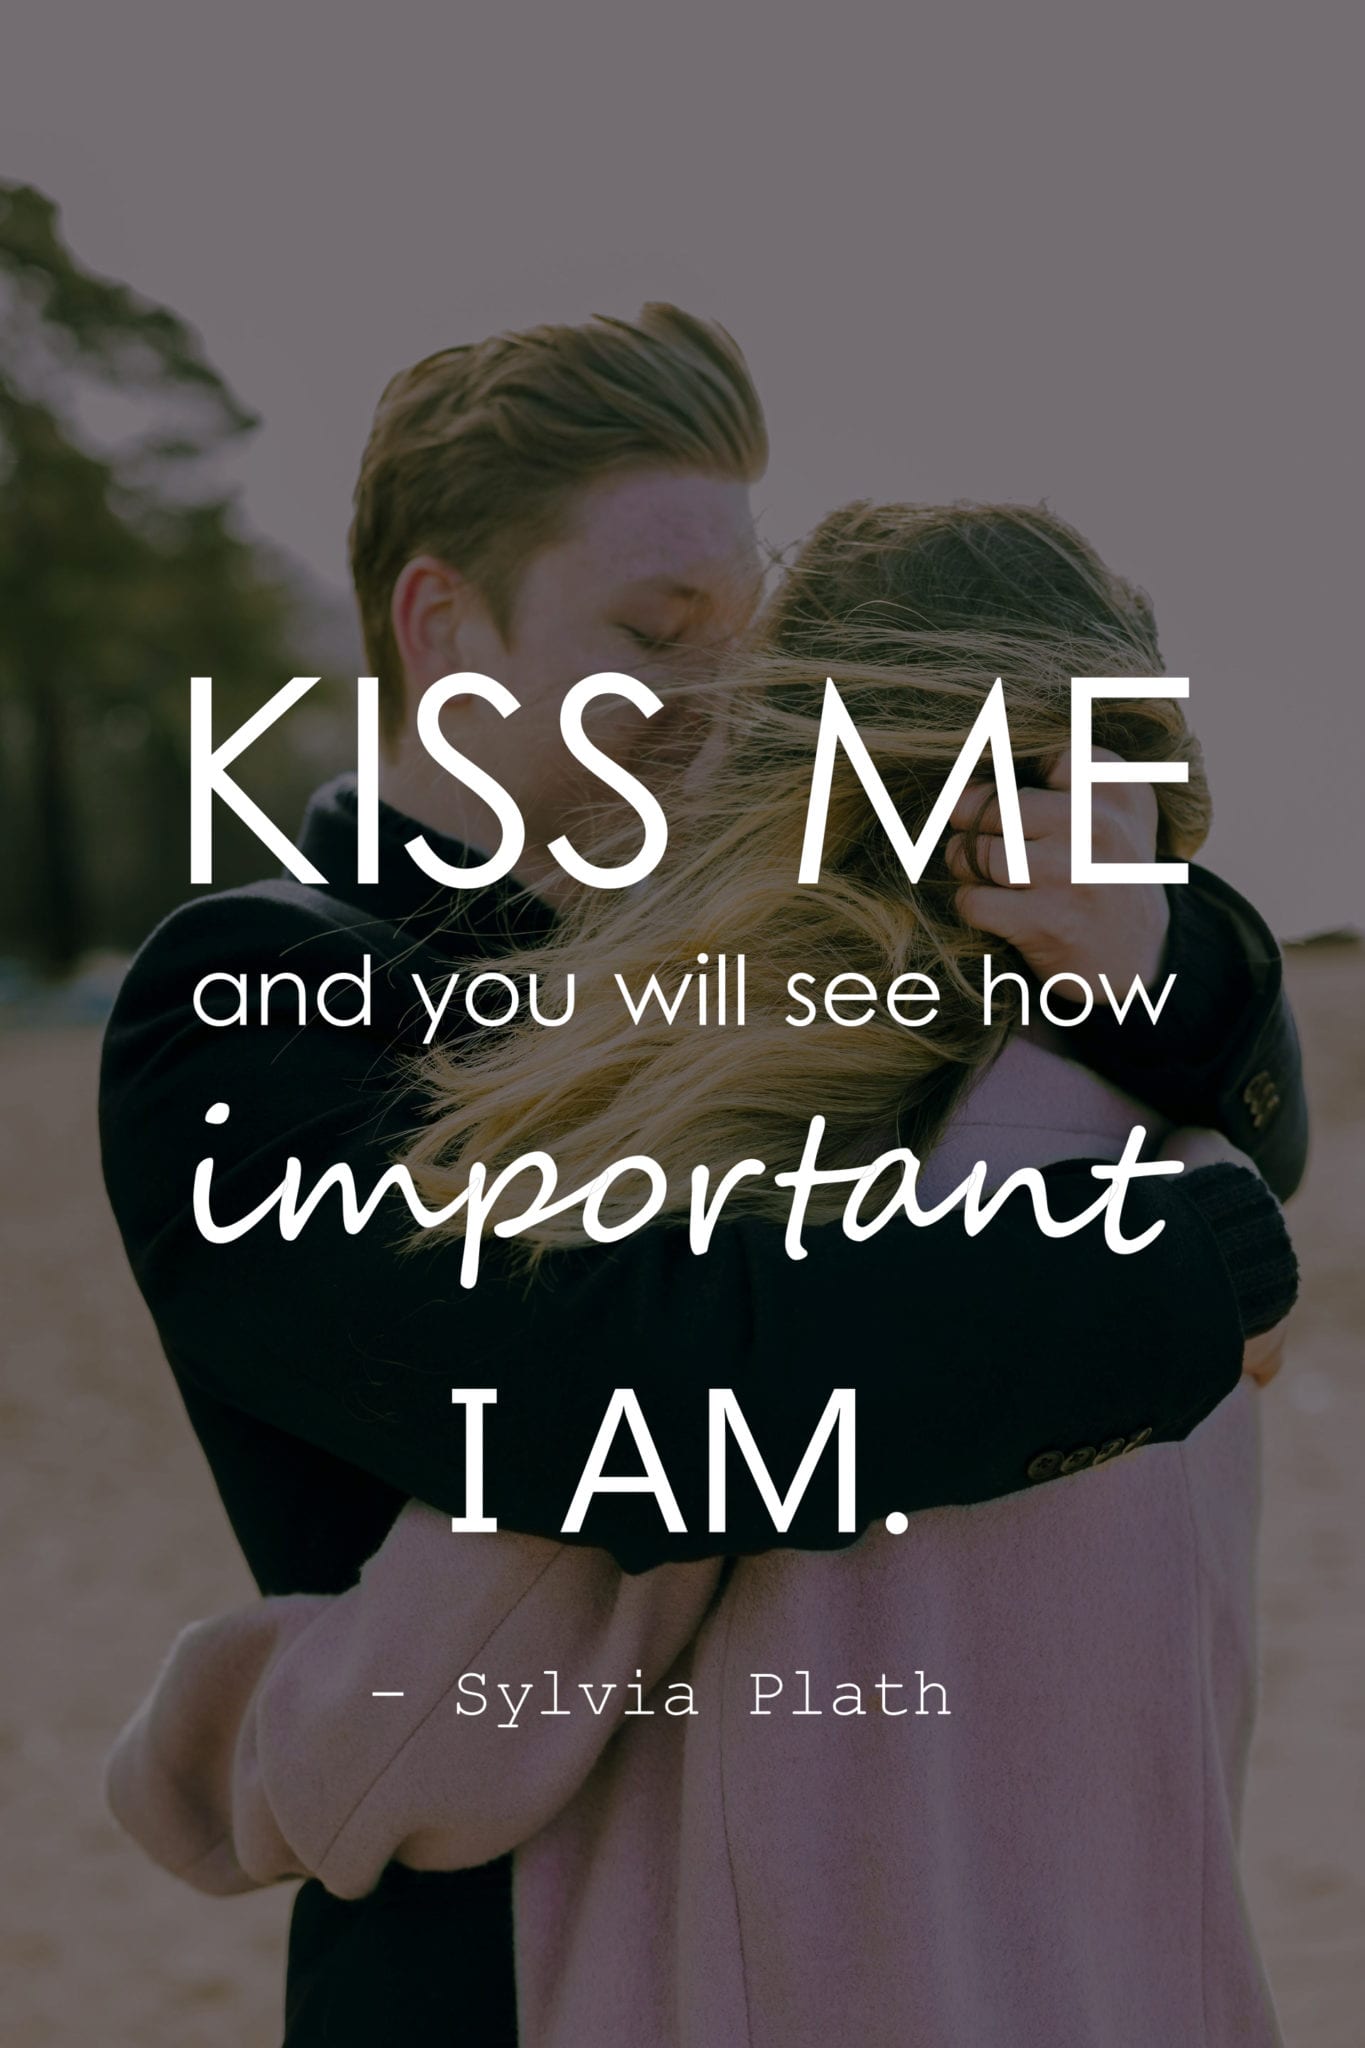 Kiss me and you will see how important I am.